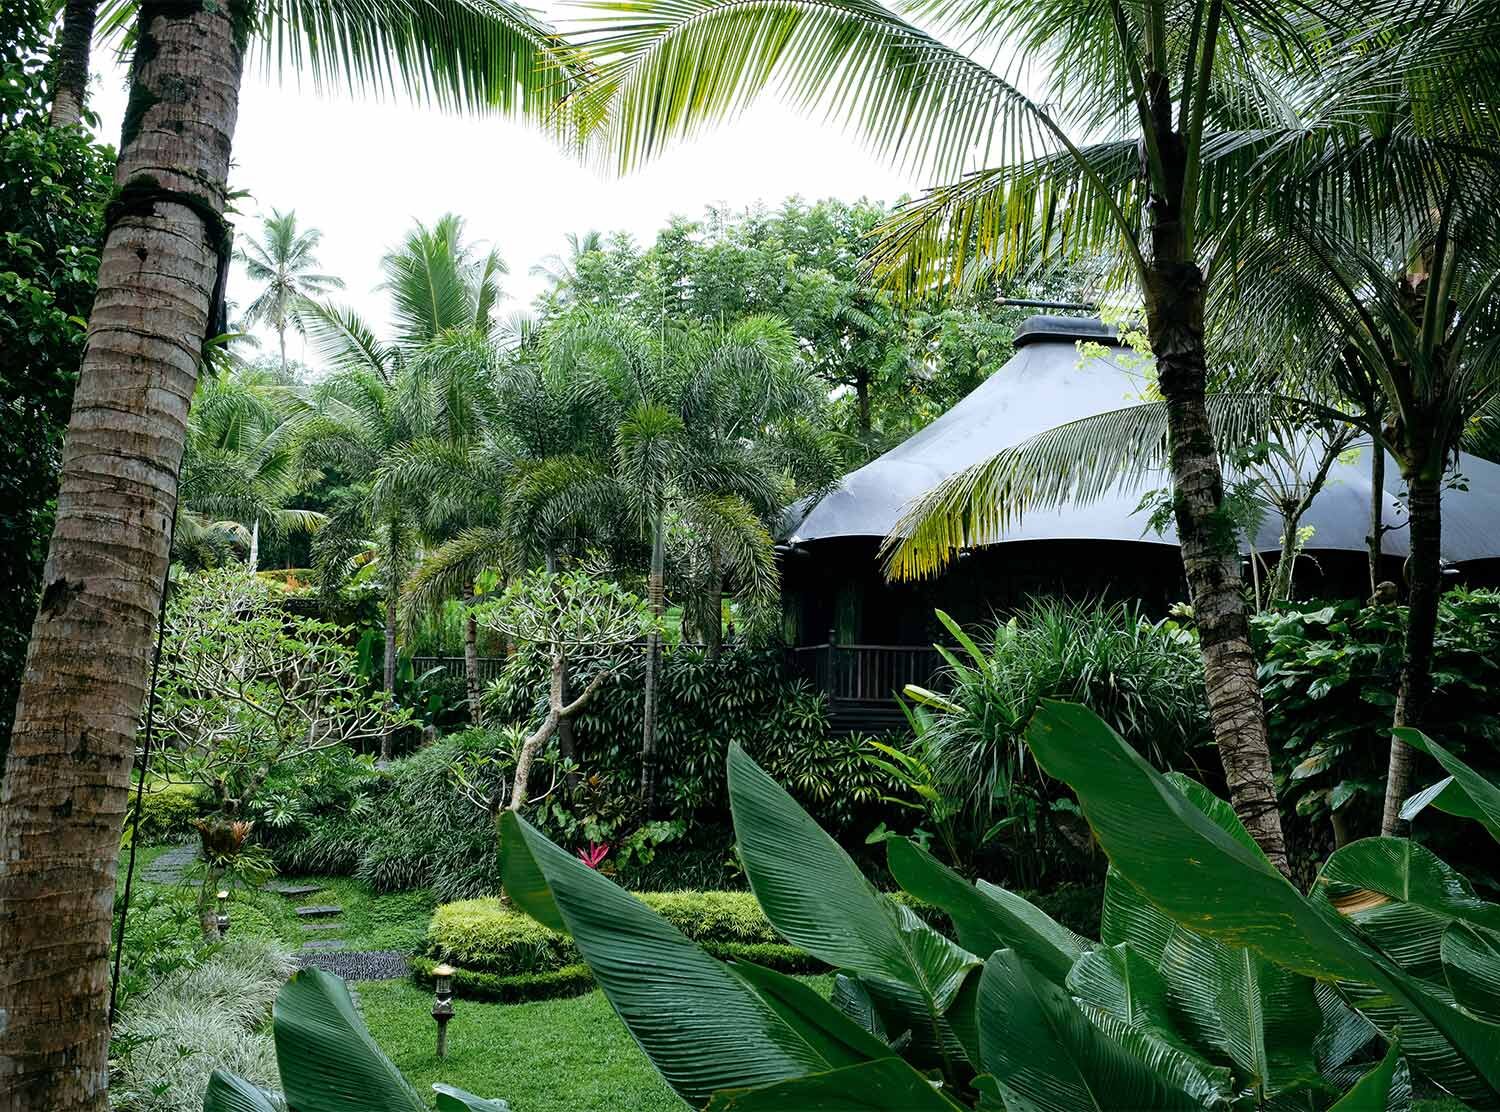 Capella Ubud Enter the tucked-away tented slice of a dream in the rainforest of Bali in the shape of the camp Capella Ubud